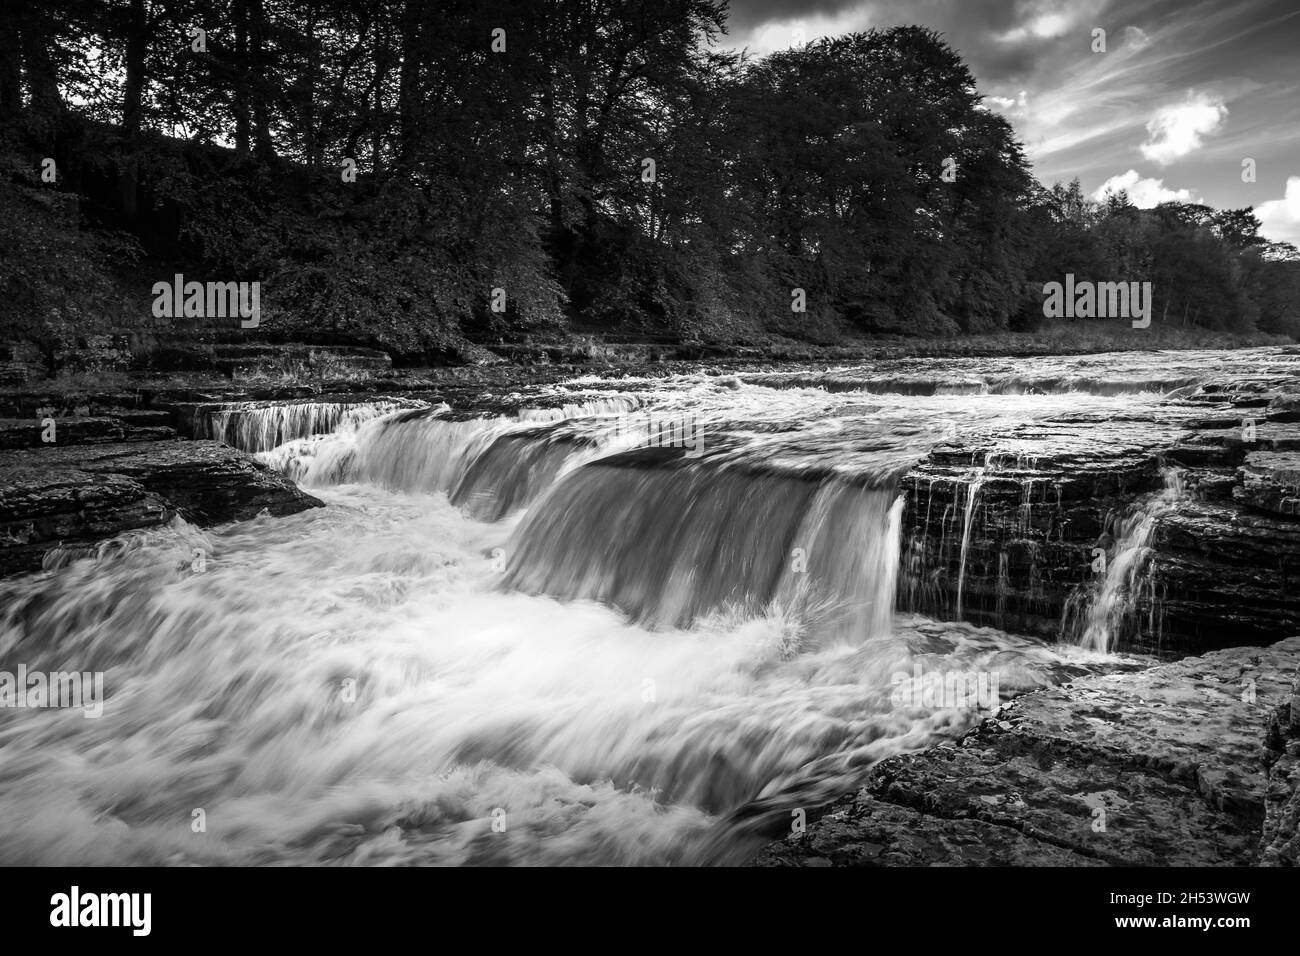 Black and white image of part of the Aysgarth falls in Wensleydale, Yorkshire. Showing river Ure flowing over many of the waterfalls. No people. Stock Photo